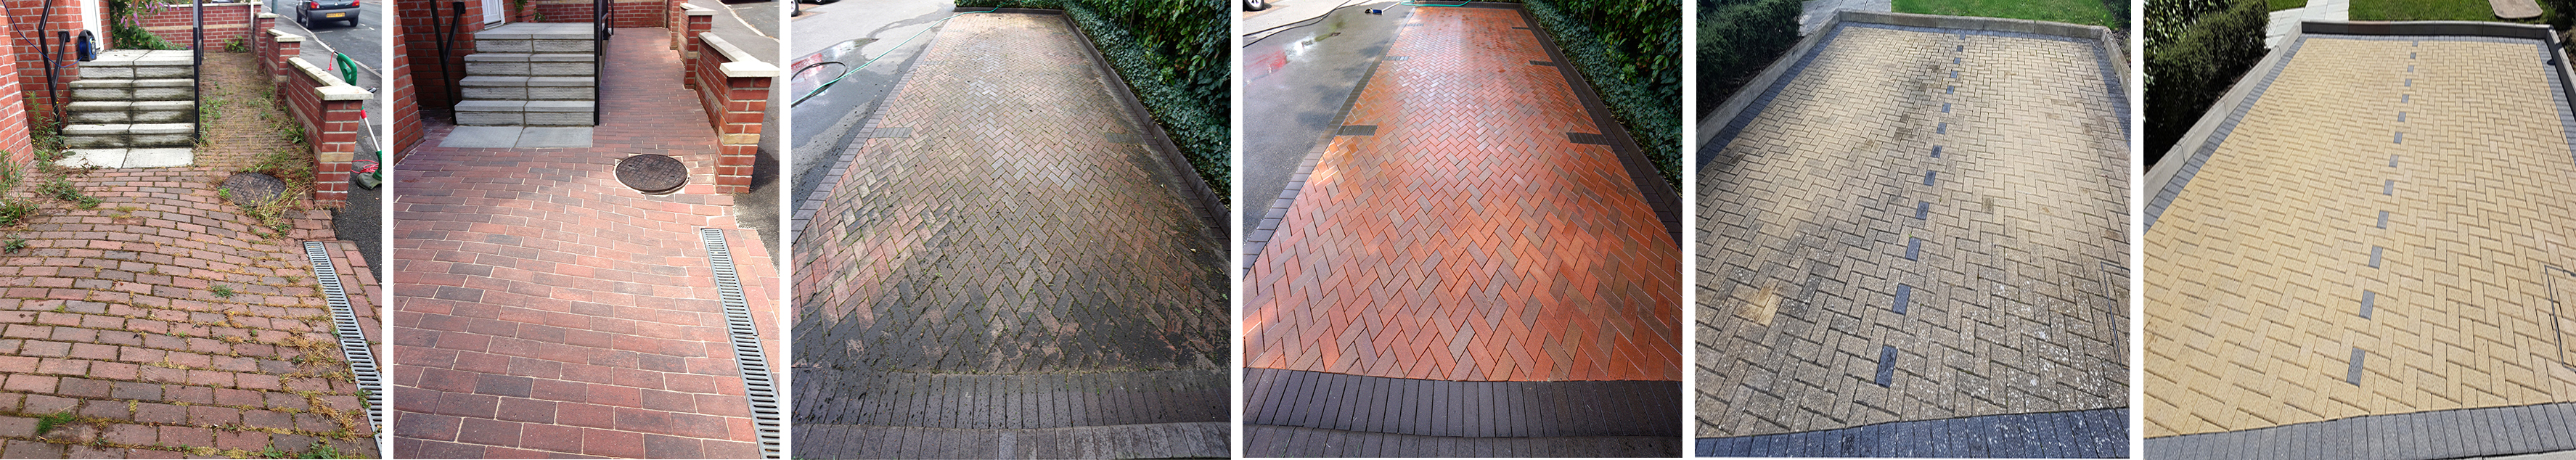 Driveway Cleaning Services in Wimborne Minster, Dorset